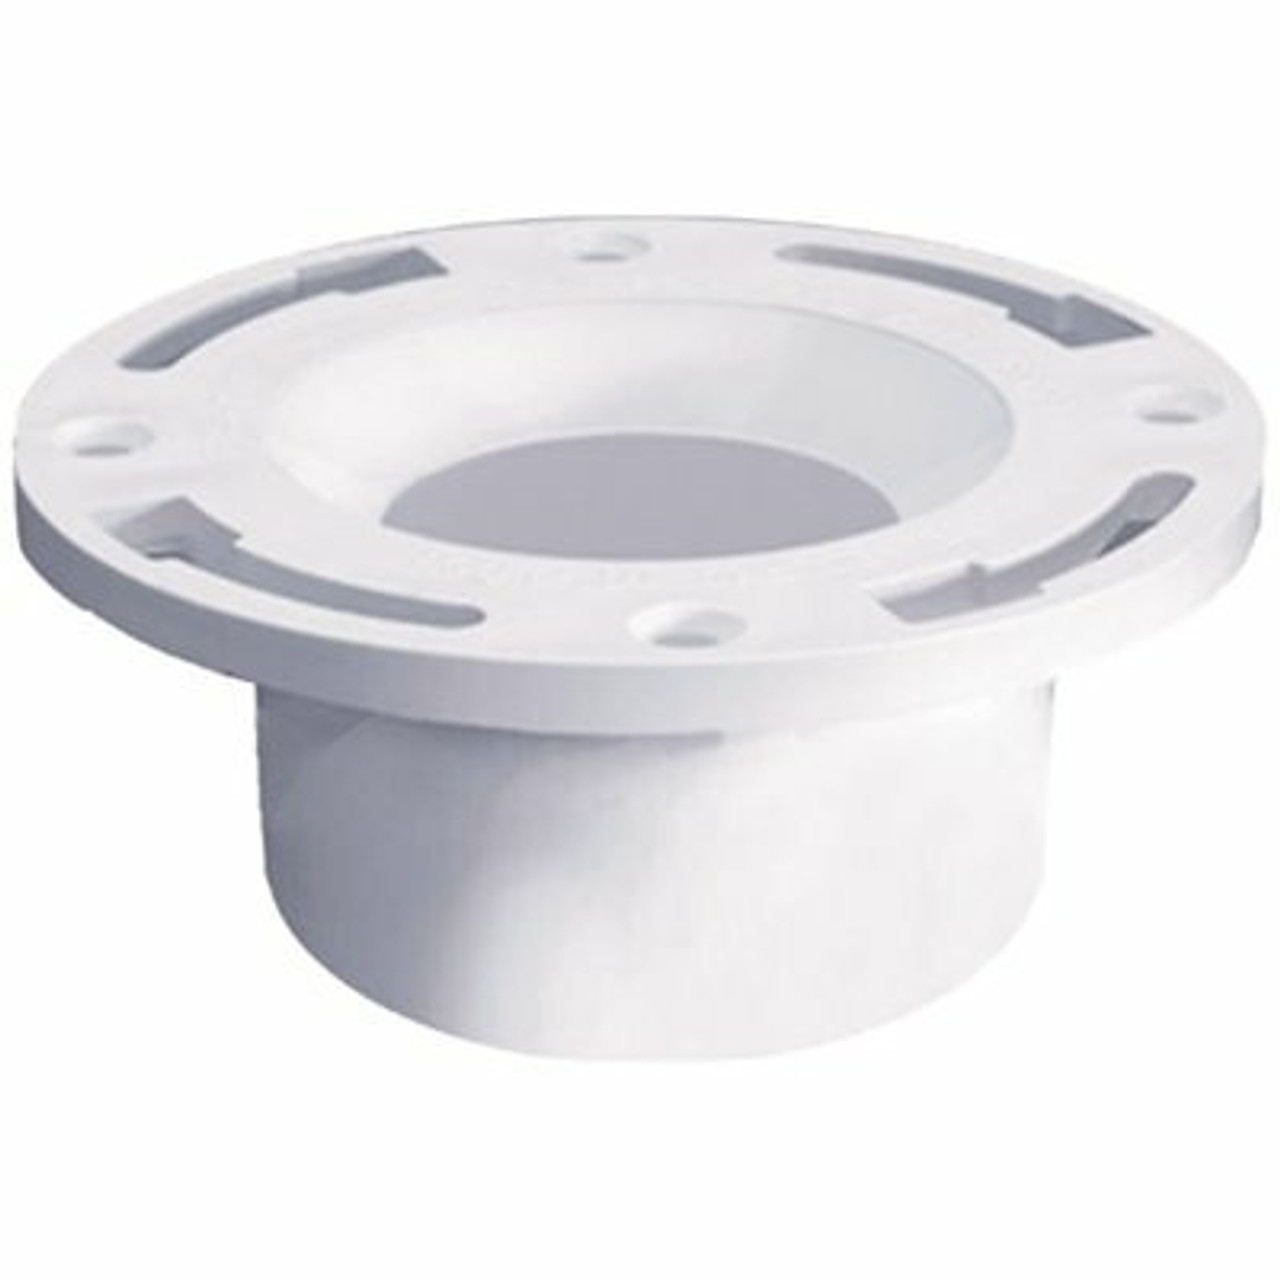 Water-Tite 86135 Flush-Tite Abs Standard Pattern Closet Flange With Knockout, Fits 3- And 4-Inch Schedule 40 Dwv Pipe